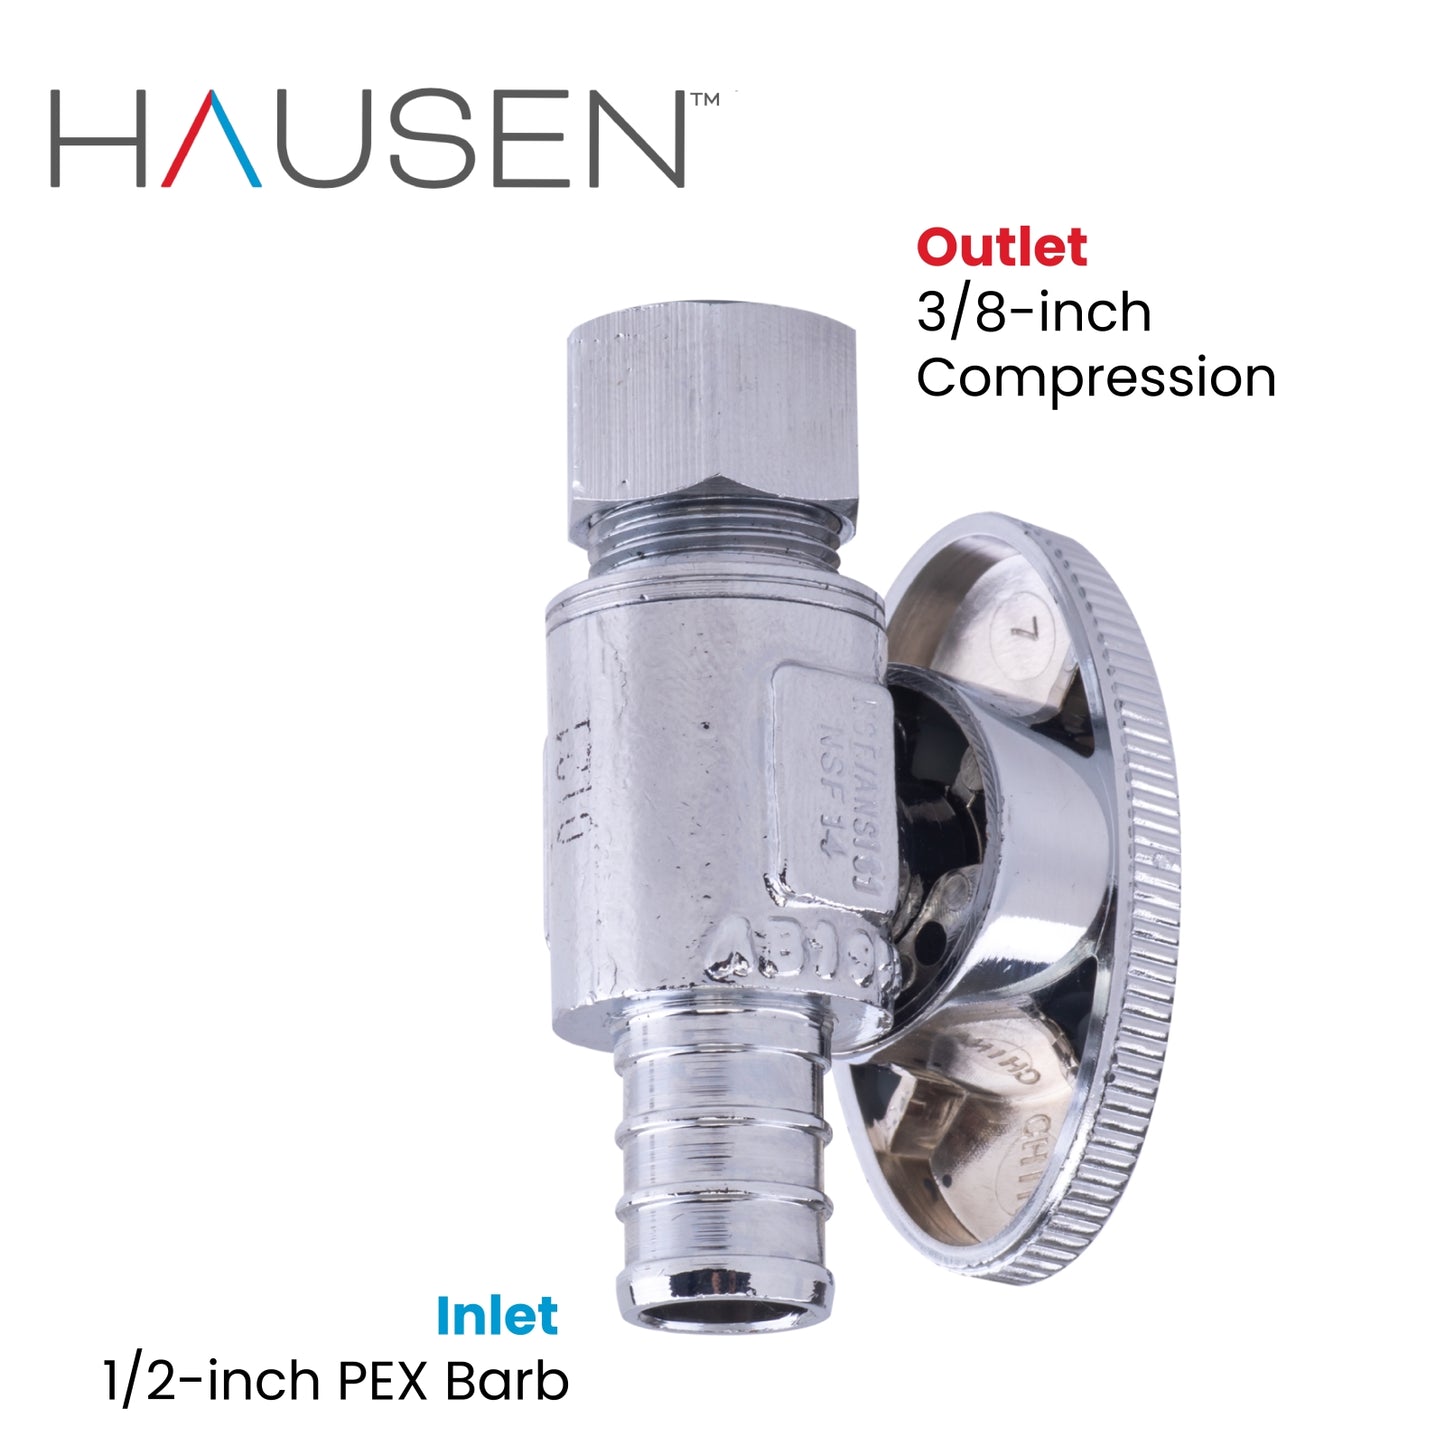 Hausen 1/2-inch PEX Barb x 3/8-inch Compression Outlet 1/4-Turn Straight Water Stop; Lead-Free Forged Brass; Chrome-Plated; cUPC/ANSI/NSF Certified; Compatible with PEX and Copper Piping, 20-Pack